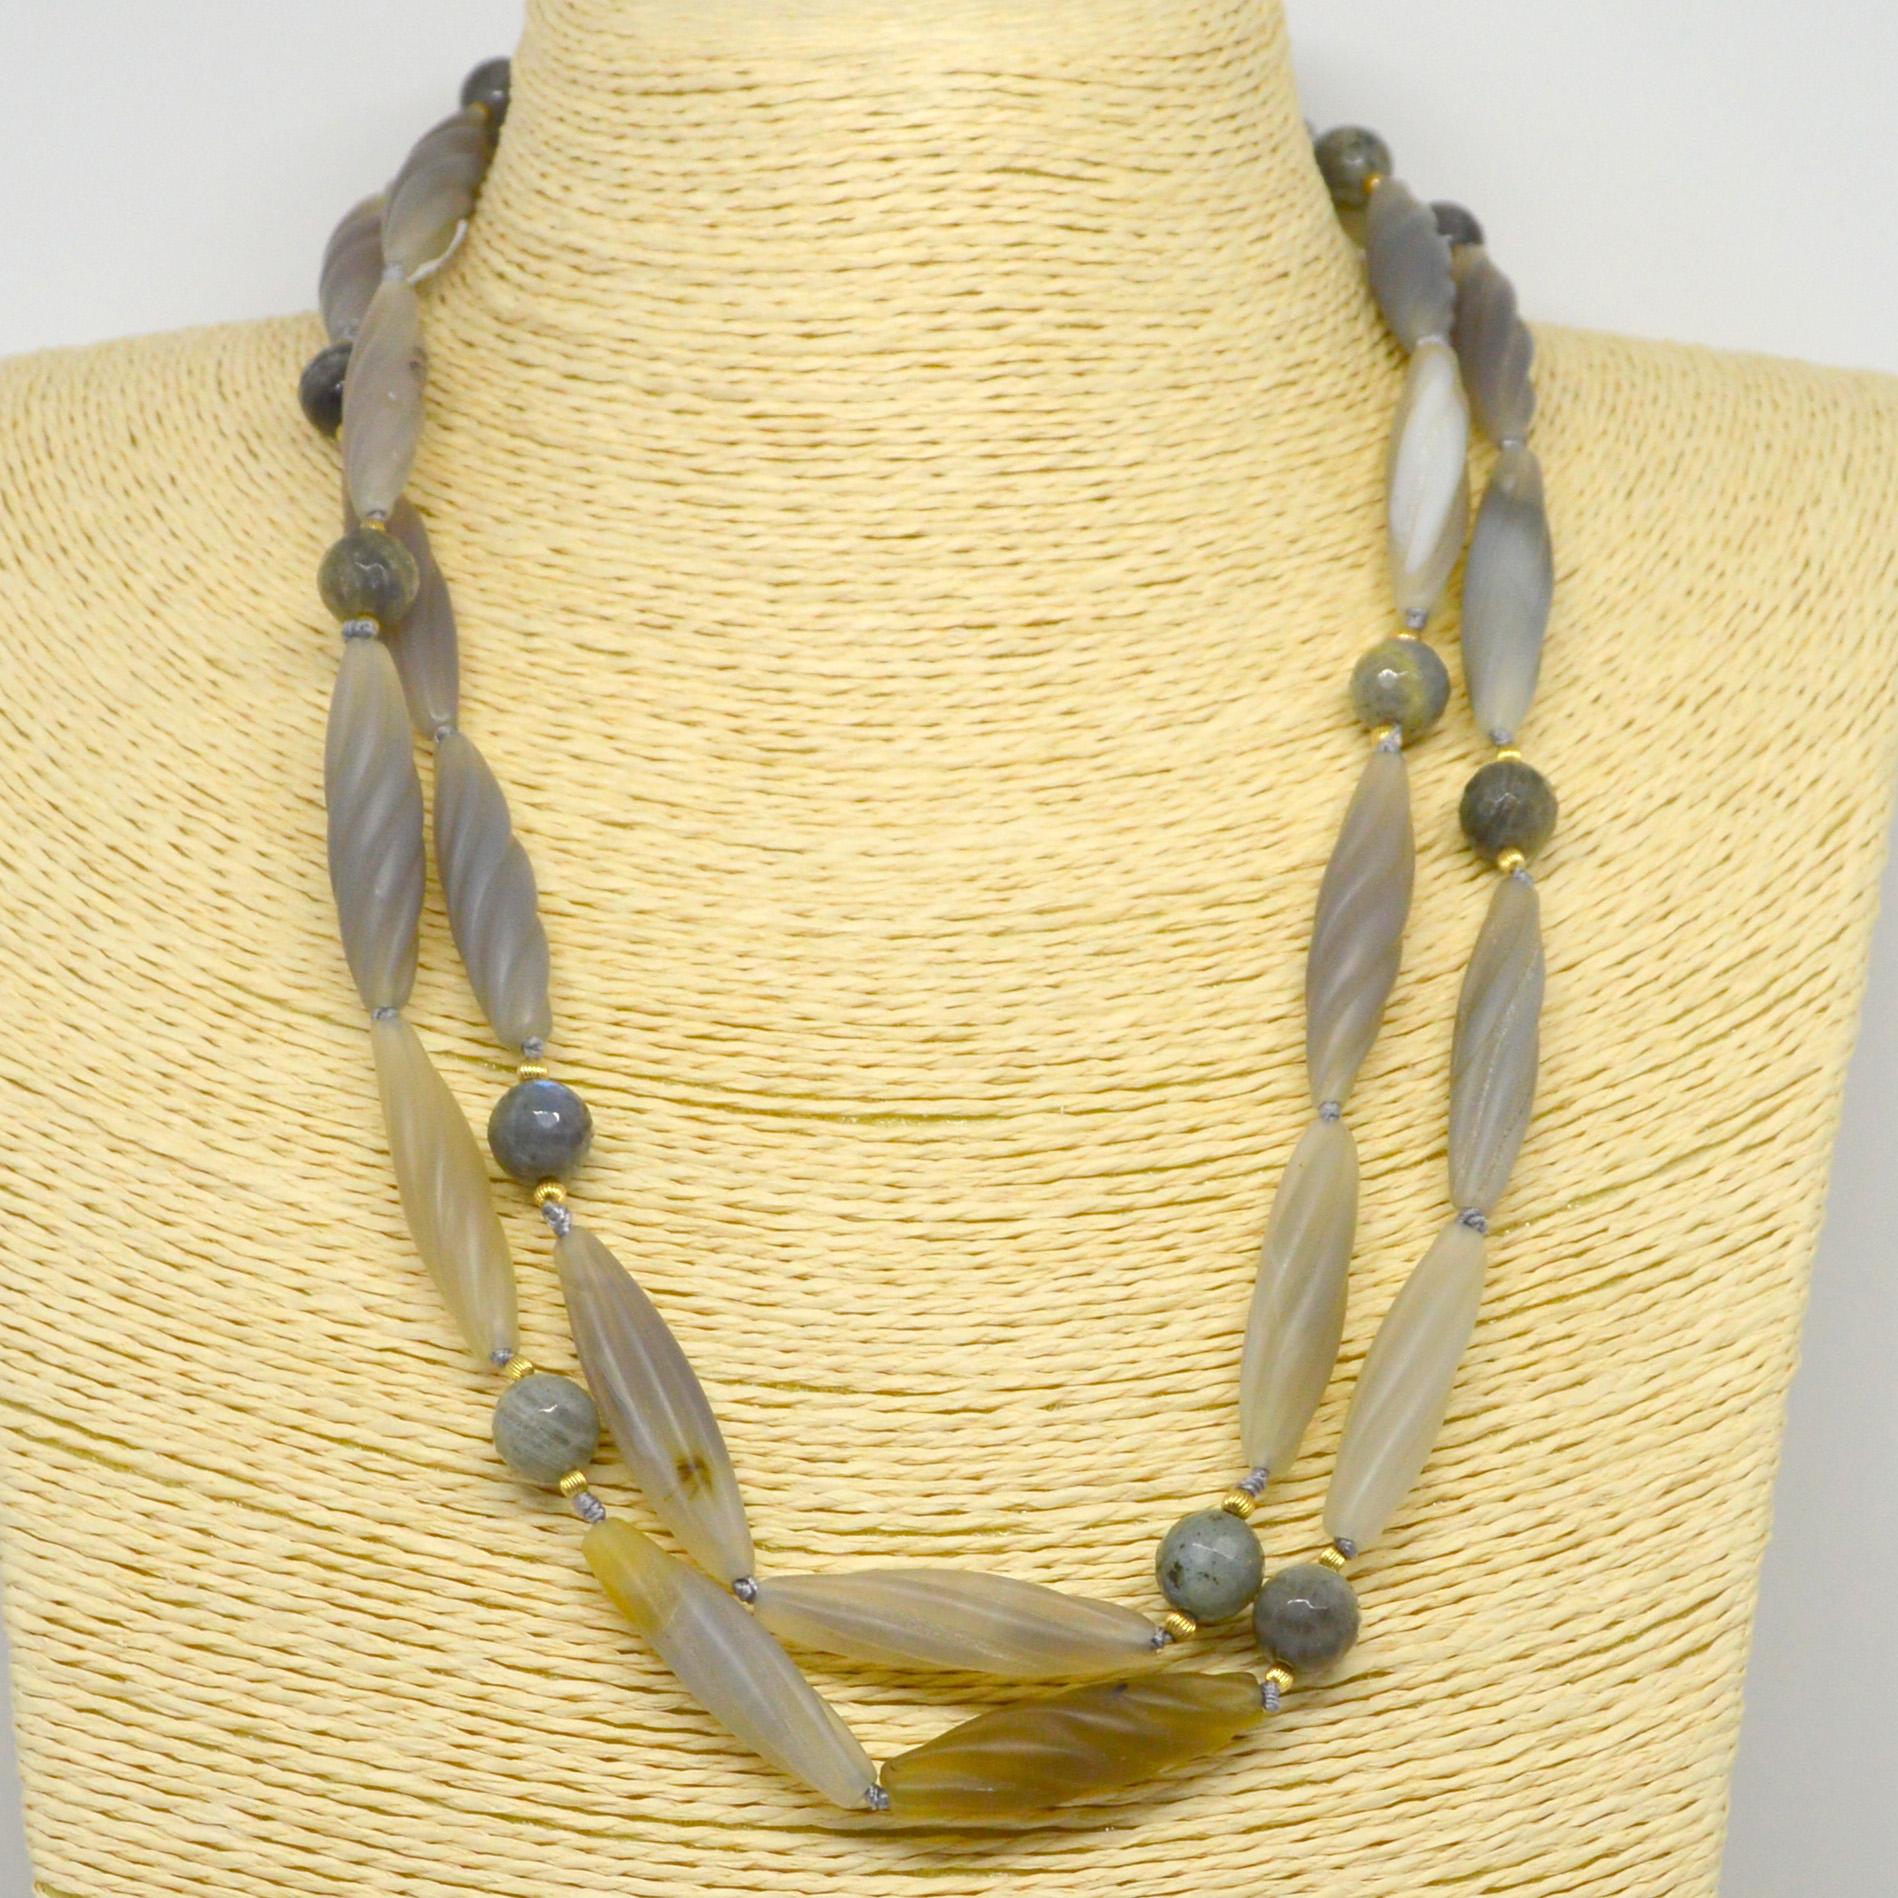 Carved grey Agate 38mm long and 10mm Faceted Labradorite beads with gold filled accent beads and Hook clasp, hand knotted for strength and durability.

Finished necklace measures 116cm.